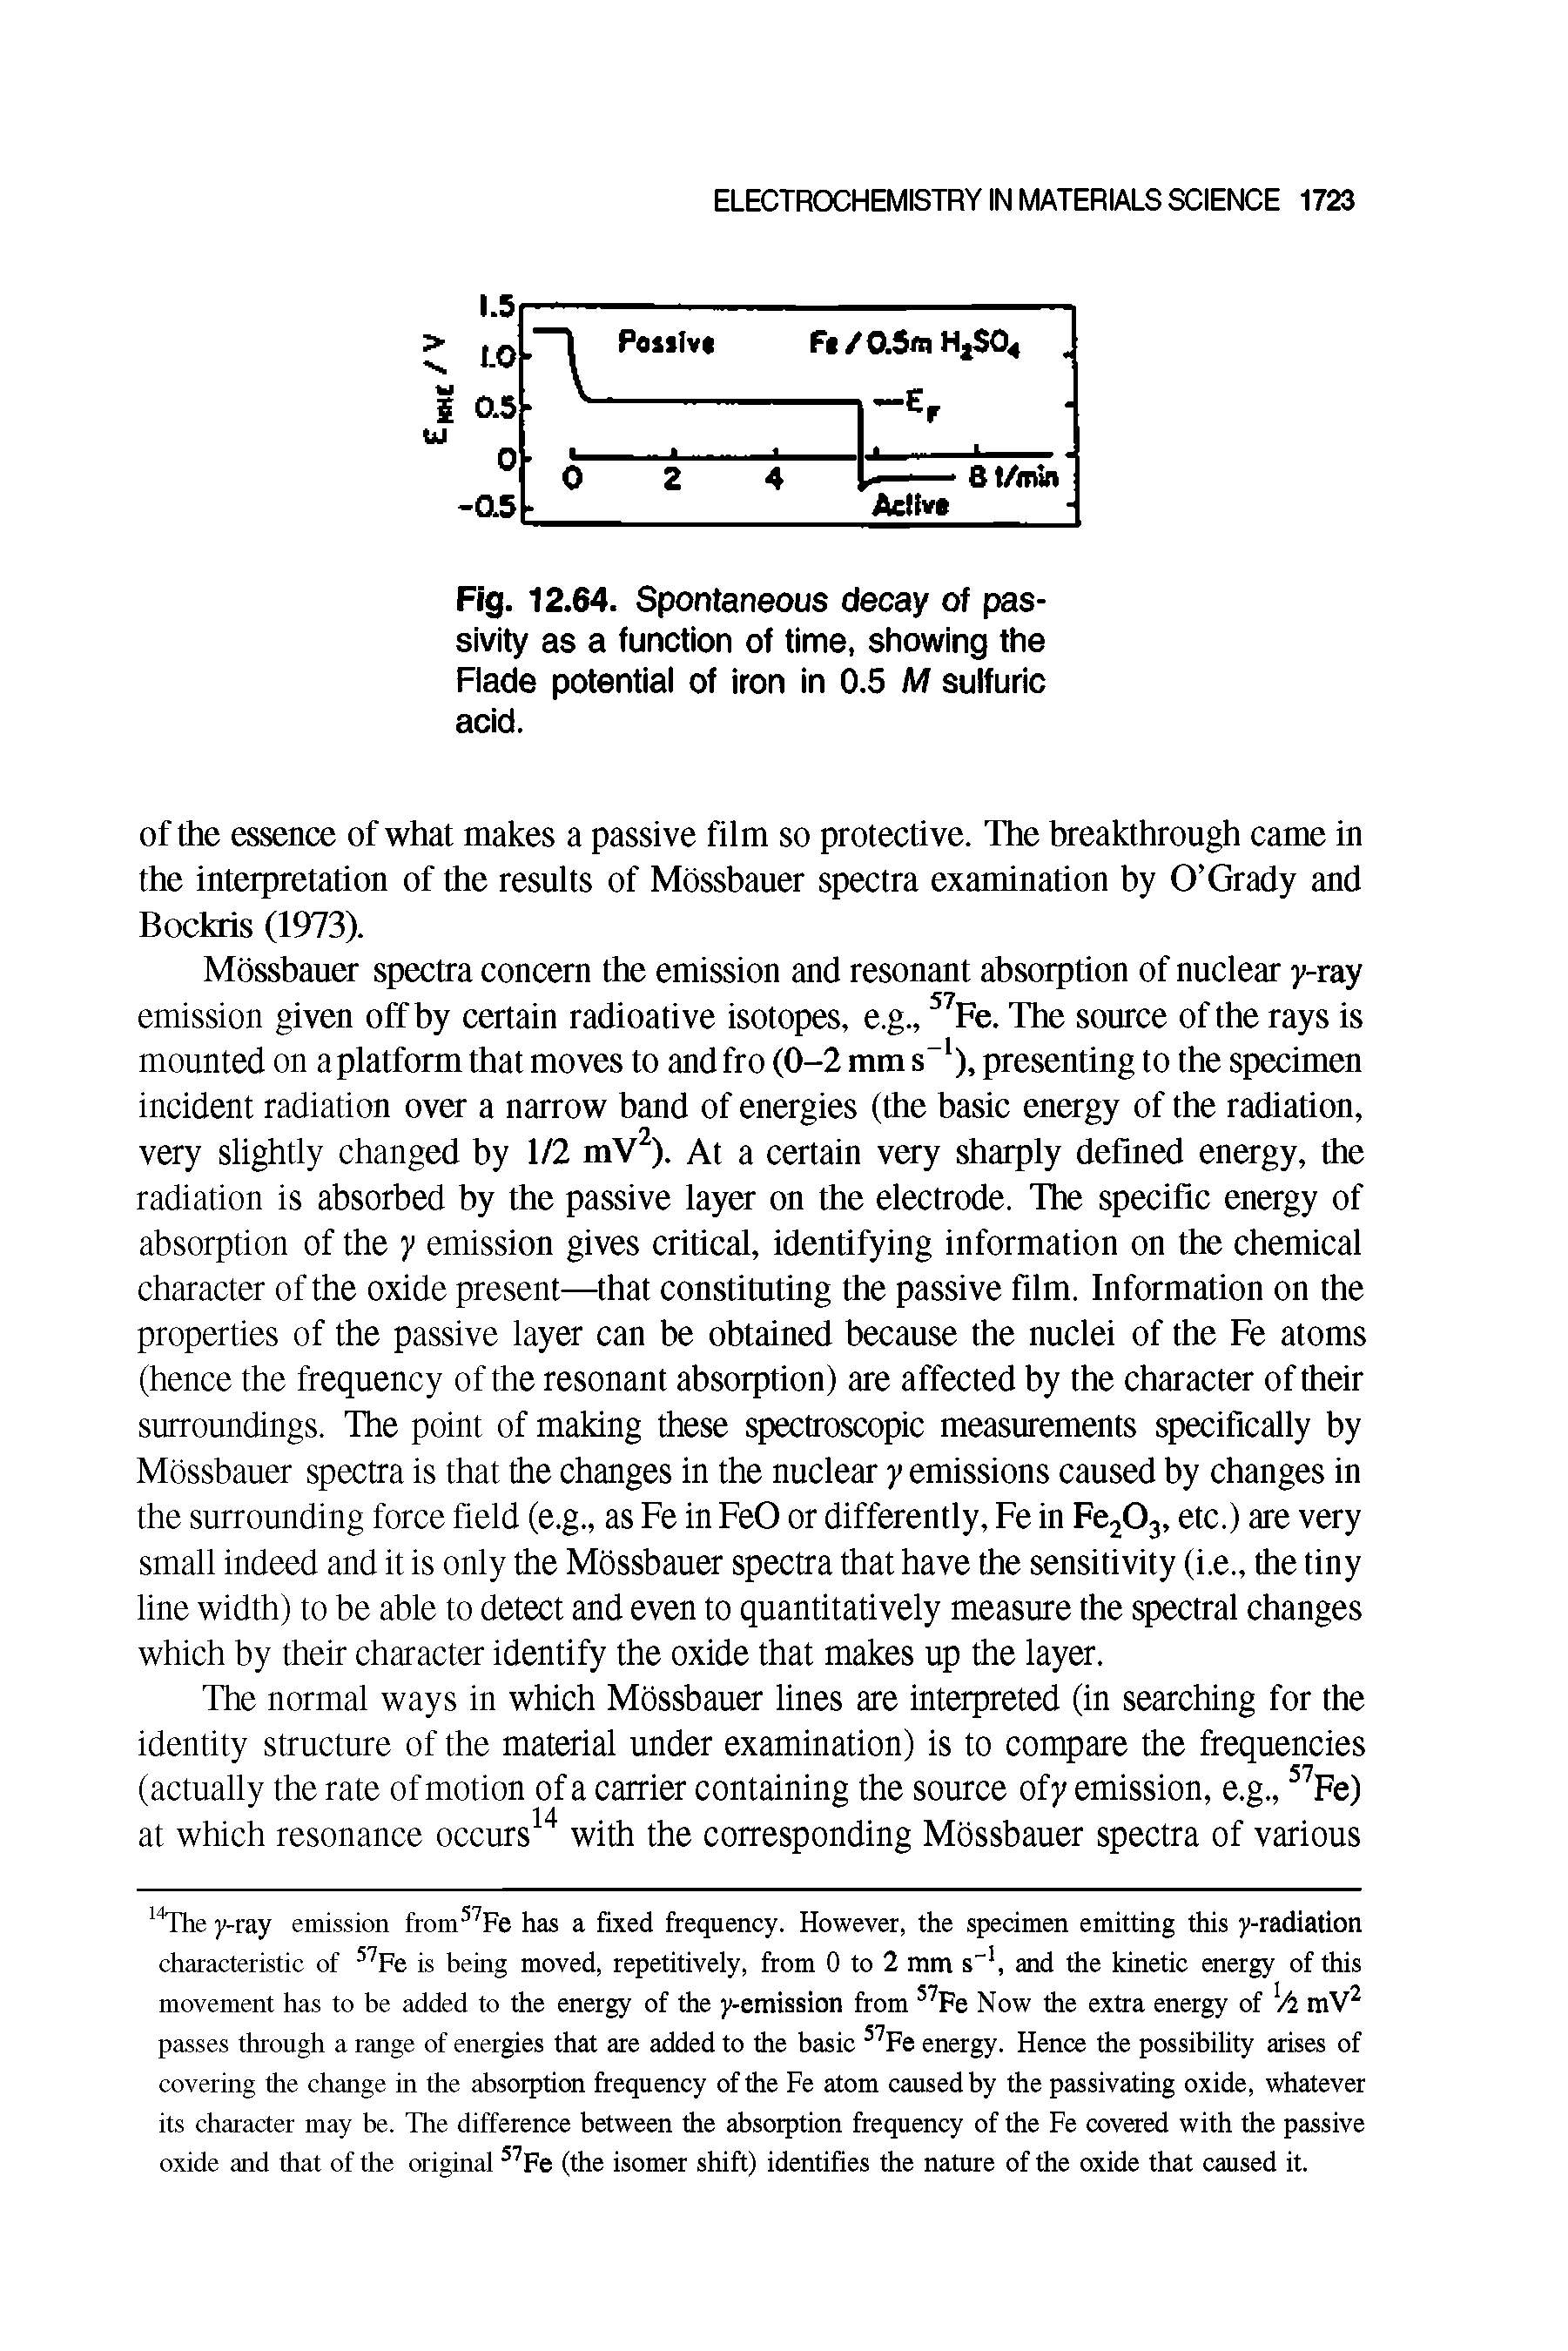 Fig. 12.64. Spontaneous decay of passivity as a function of time, showing the Flade potential of iron in 0.5 M sulfuric acid.